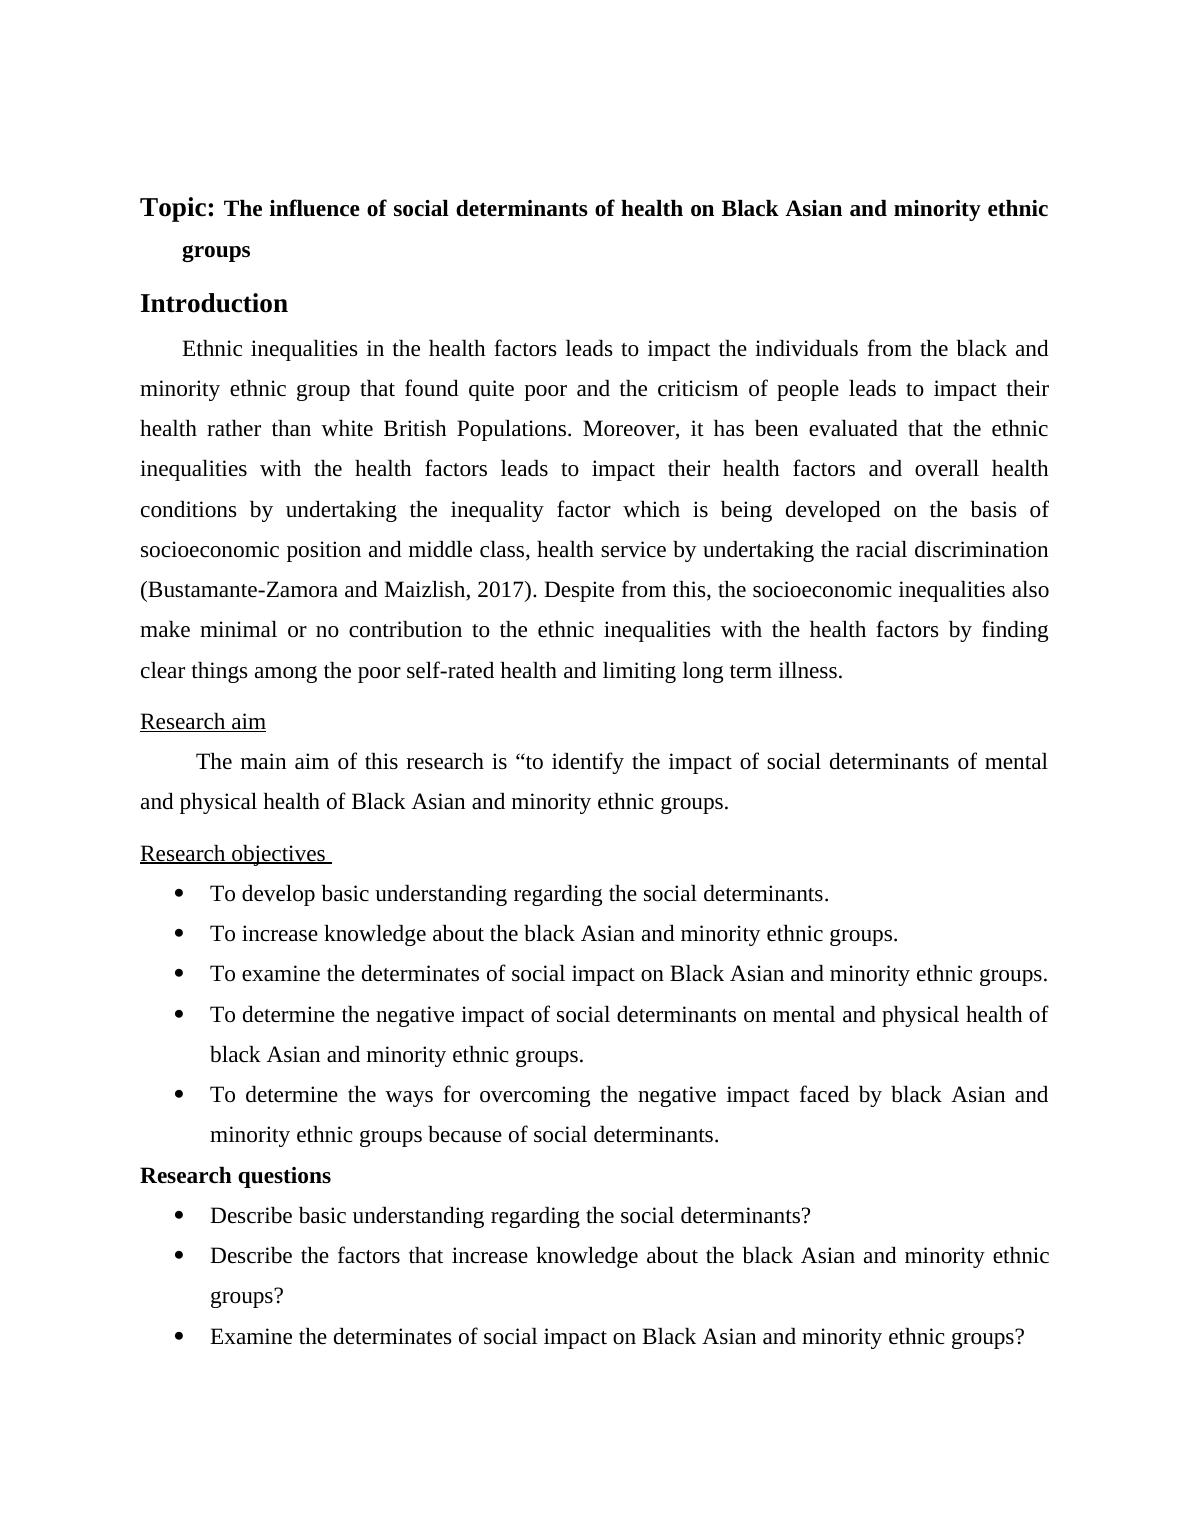 The influence of social determinants of health on Black Asian and minority ethnic groups_3